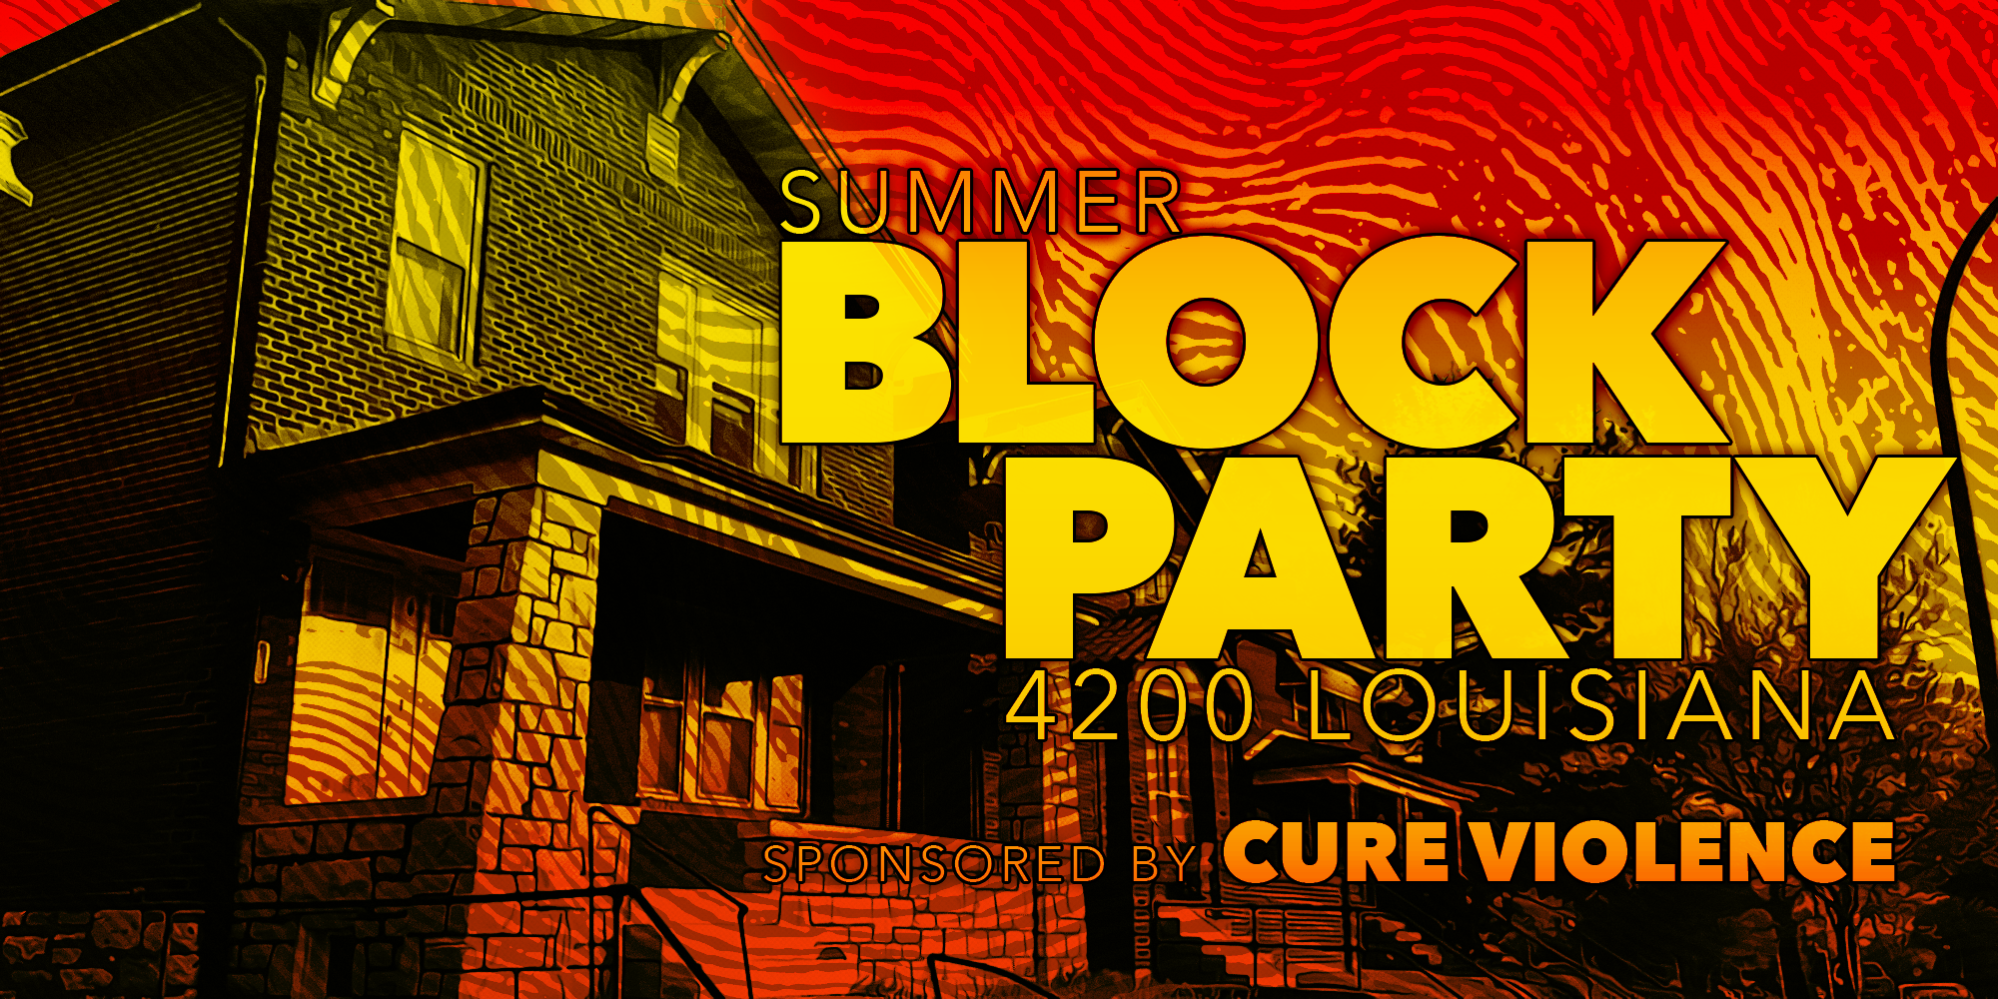 Summer Block Party on 4200 Louisiana, sponsored by Cure Violence.